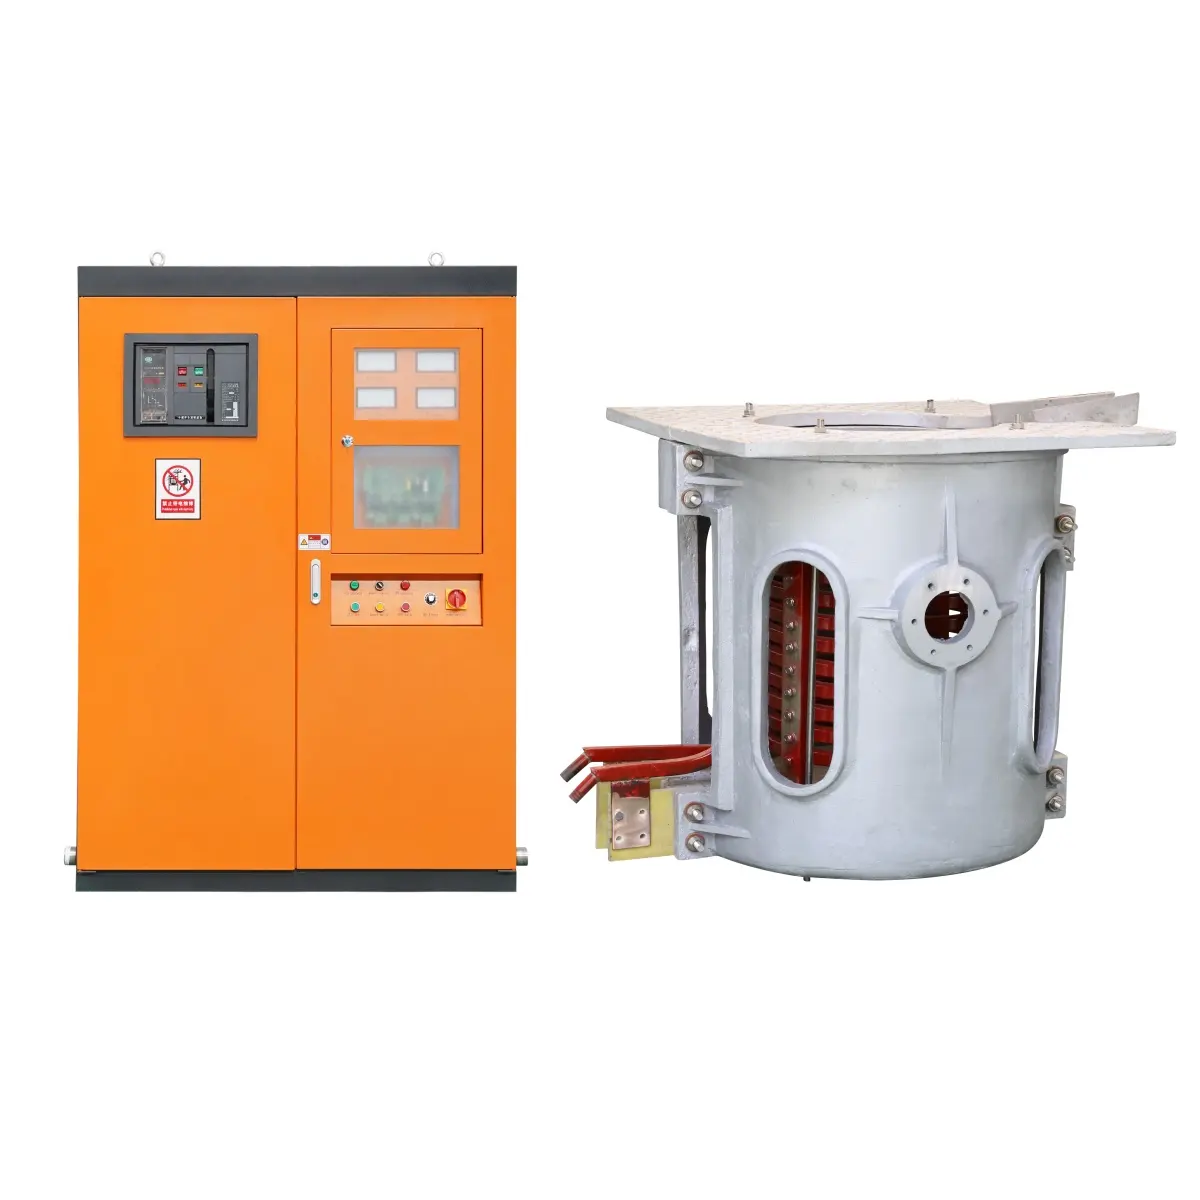 LYJD New high quality middle sized easy to operate electric induction melting industrial melting Furnace